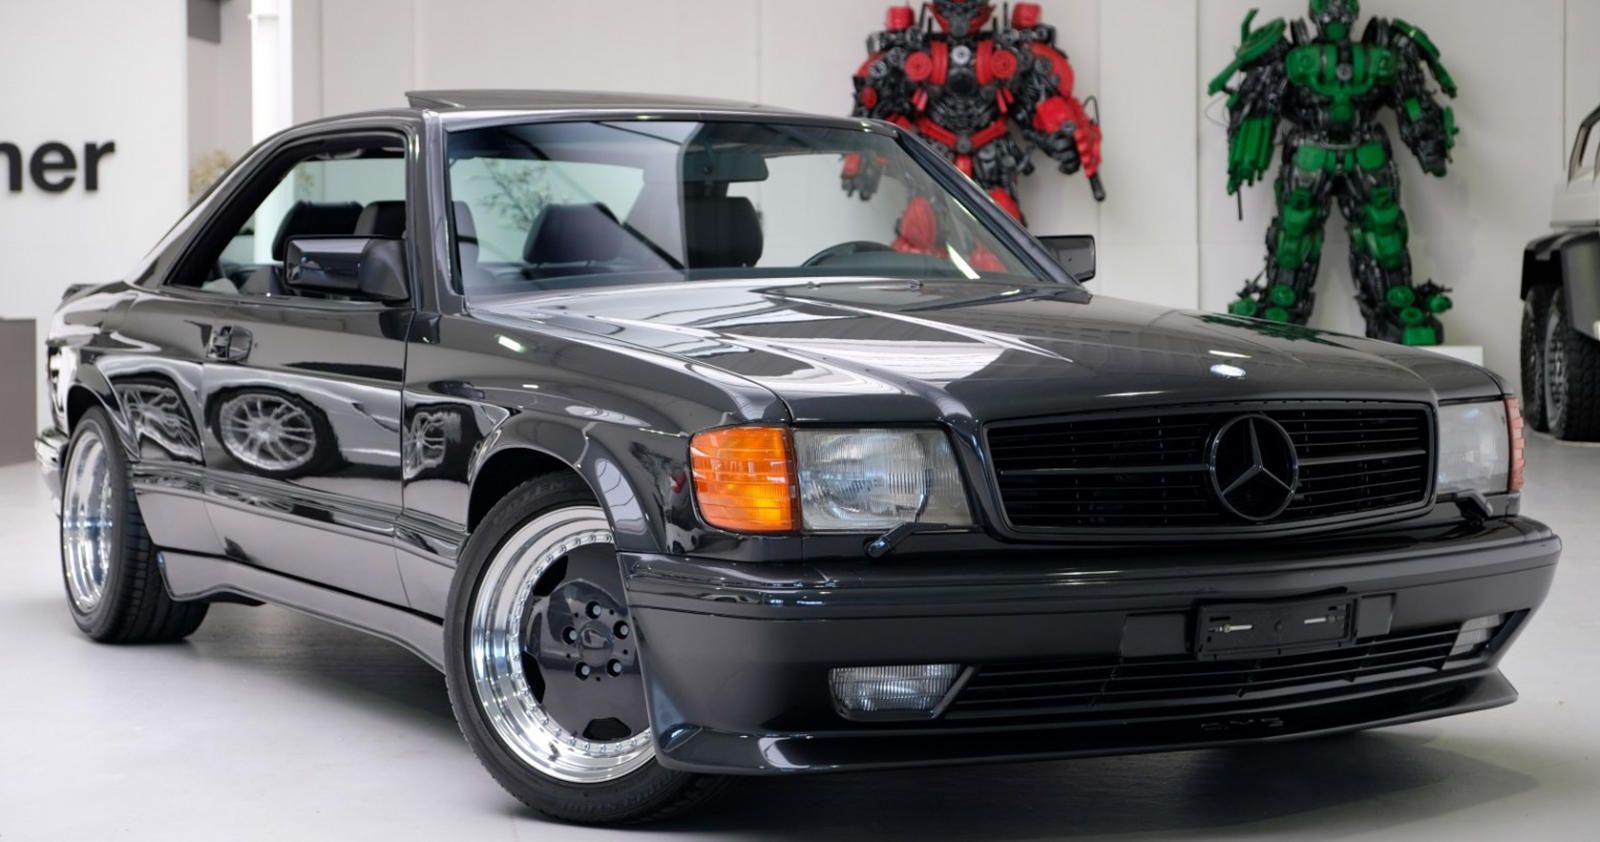 Check Out This Custom 1989 Mercedes 560 Sec Amg 6 0 Widebody